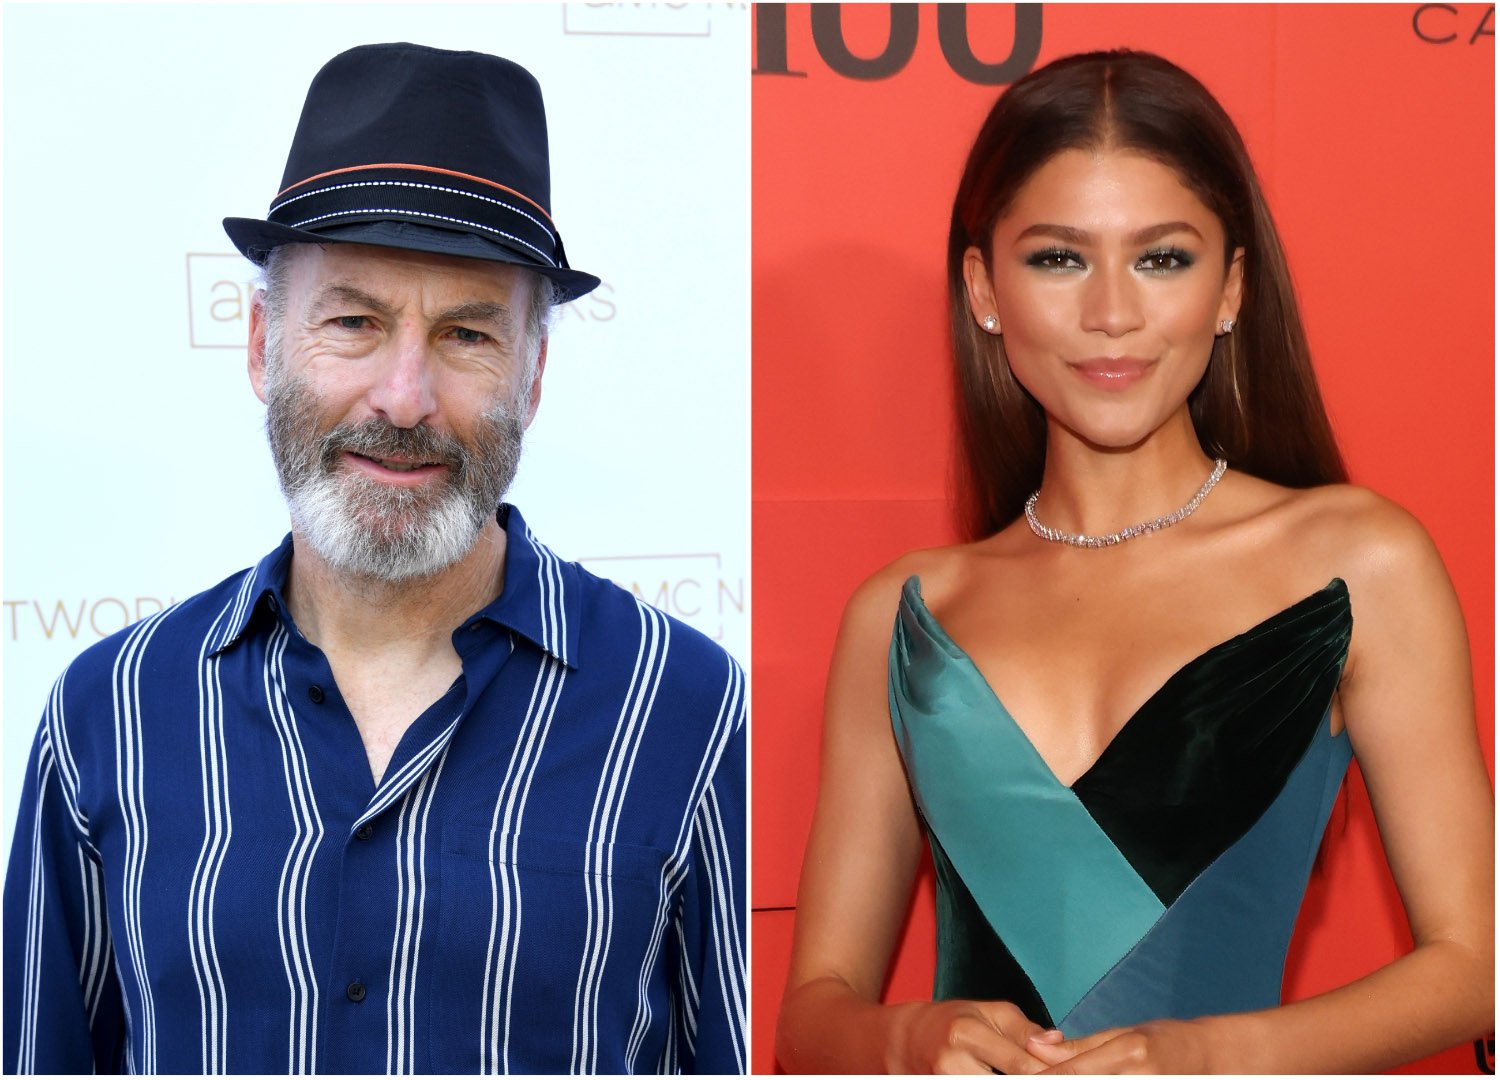 2022 Emmy nominees for Outstanding Lead Actor and Actress (respectively) in a Drama Series Bob Odenkirk and Zendaya